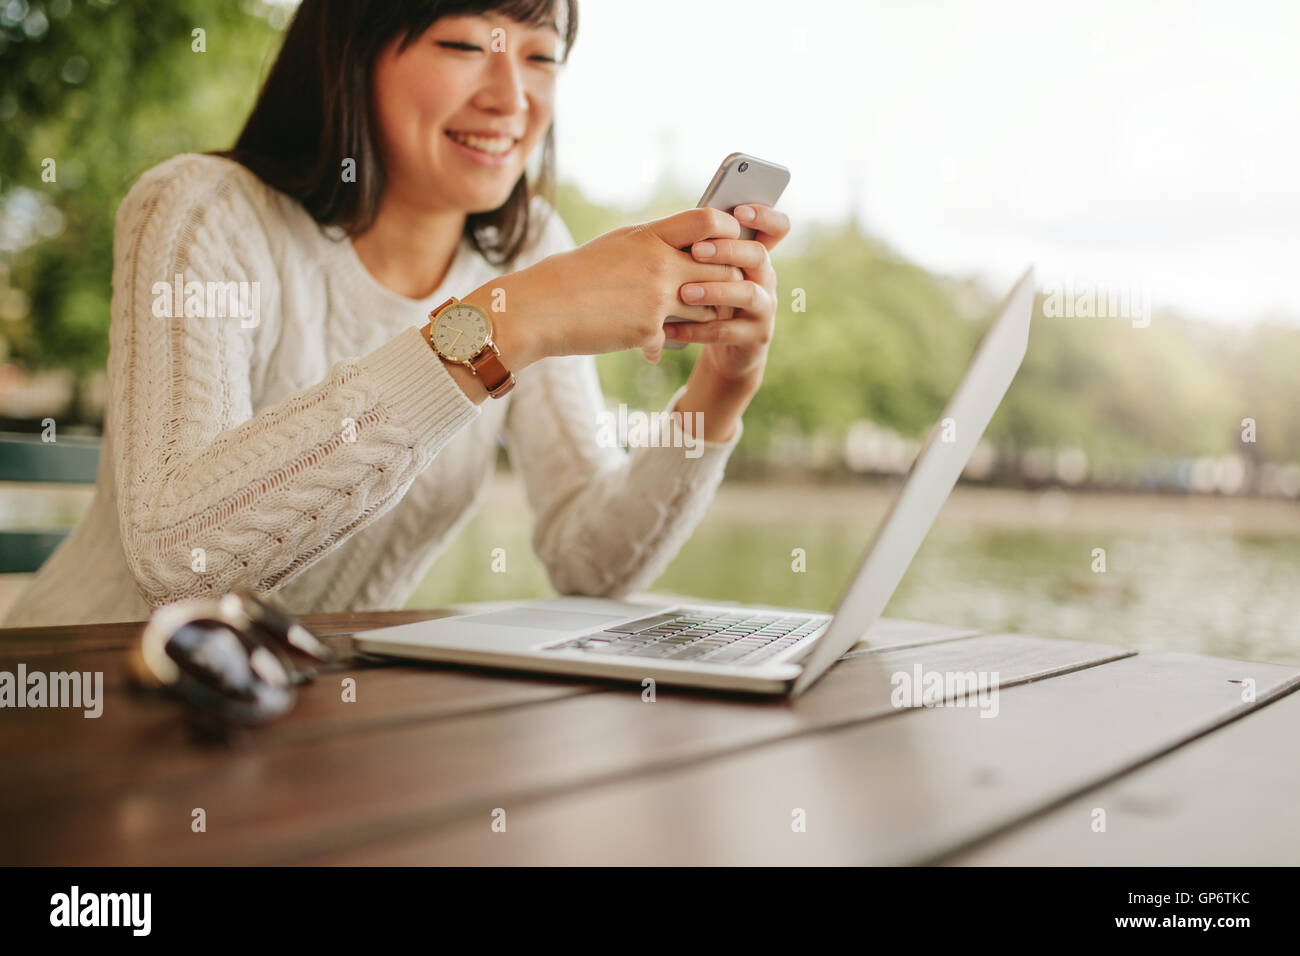 Shot of smiling woman using mobile phone at outdoor cafe. Young female sitting at table with laptop reading text message on her Stock Photo